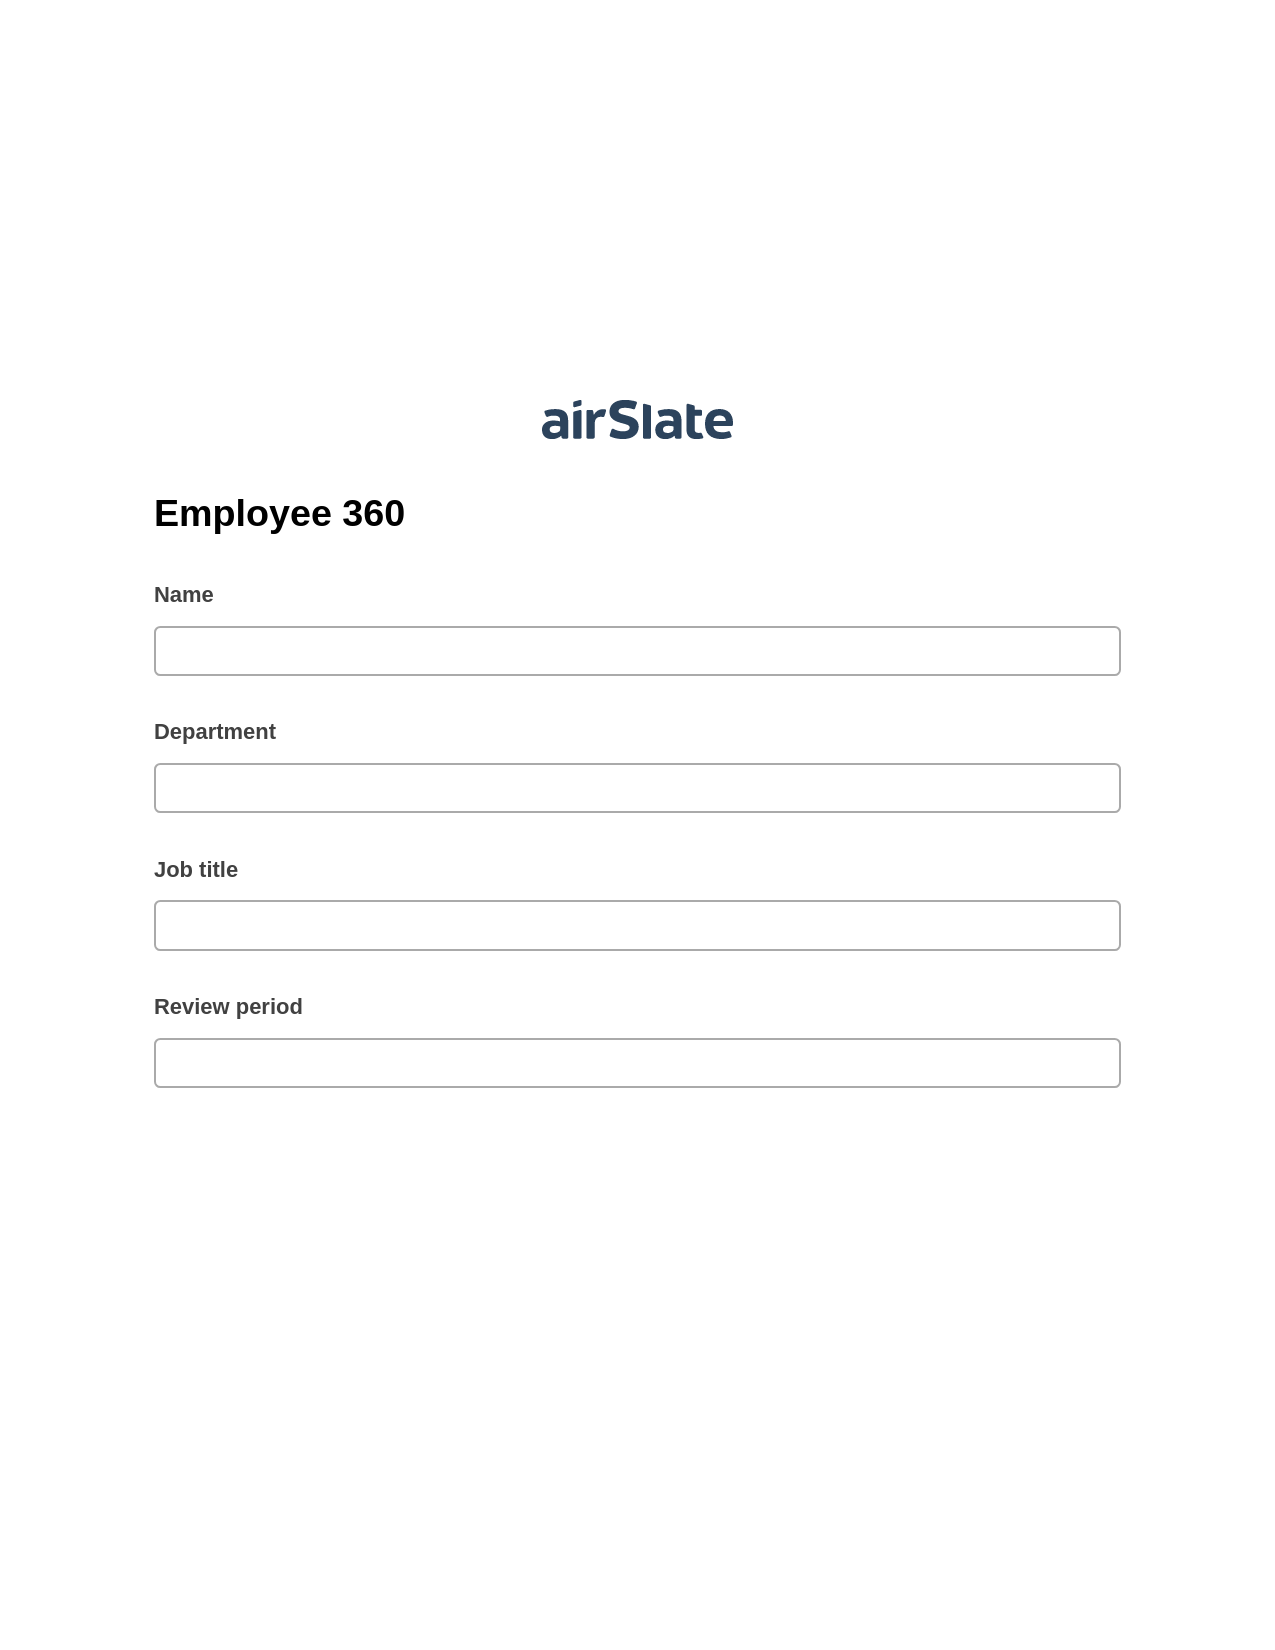 Multirole Employee 360 Pre-fill from MS Dynamics 365 Records, Export to MS Dynamics 365 Bot, Post-finish Document Bot